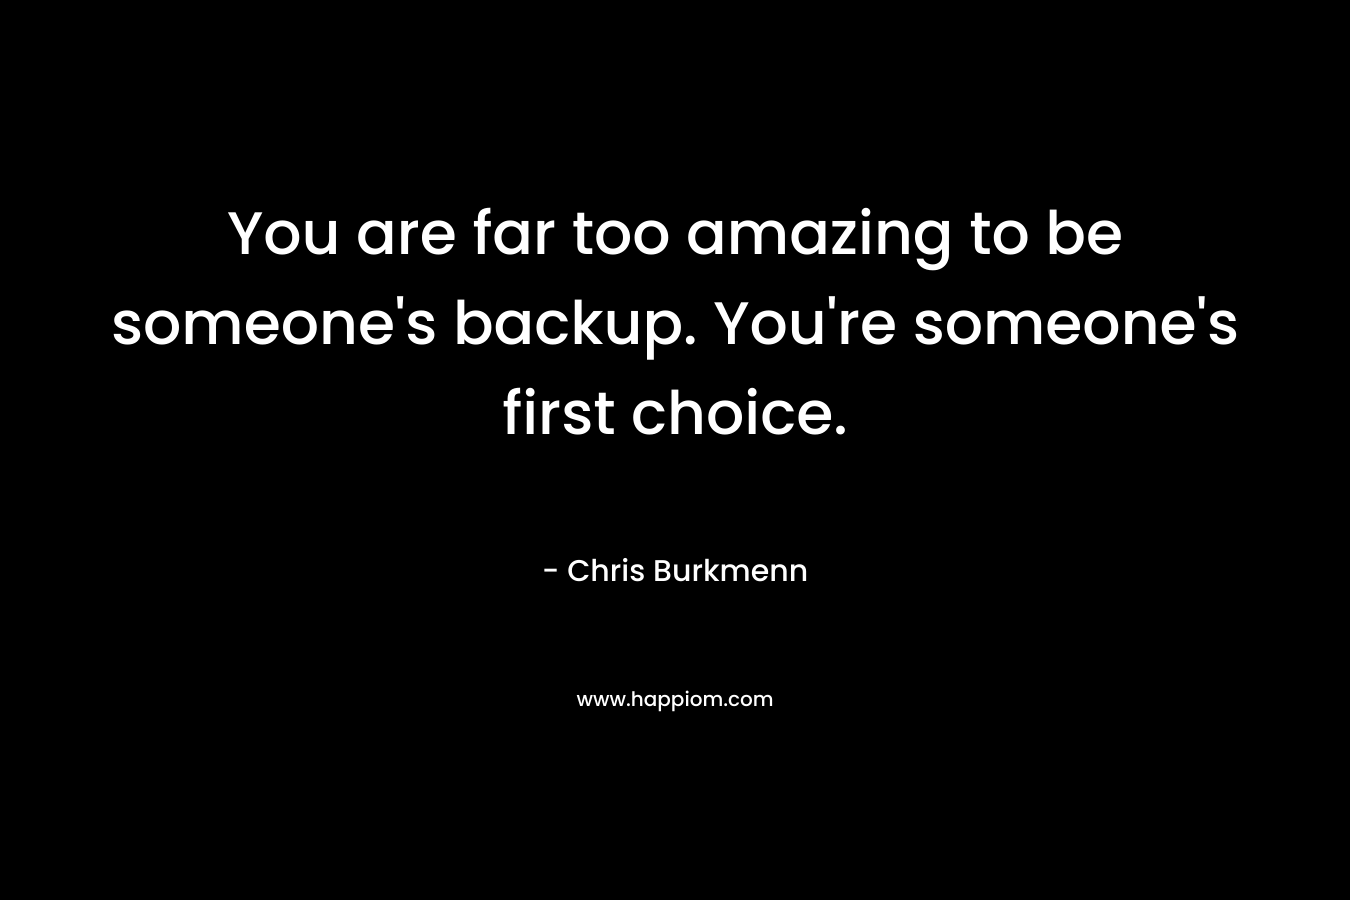 You are far too amazing to be someone's backup. You're someone's first choice.